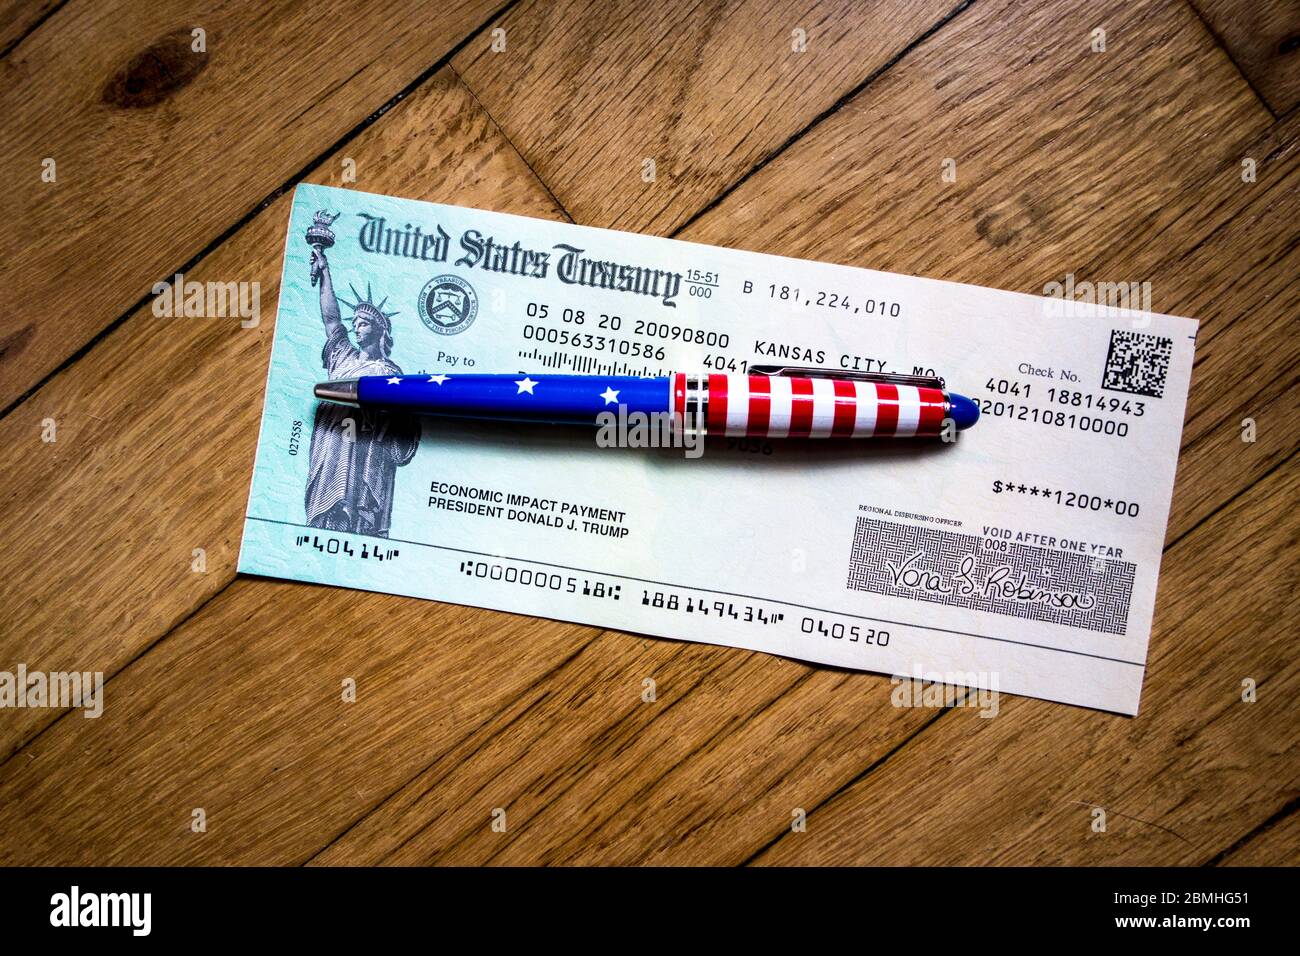 US Treasury $1,200 stimulus check to an individual as part of the Coronavirus Aid Relief and Economic Security Act, CARES Act Stock Photo